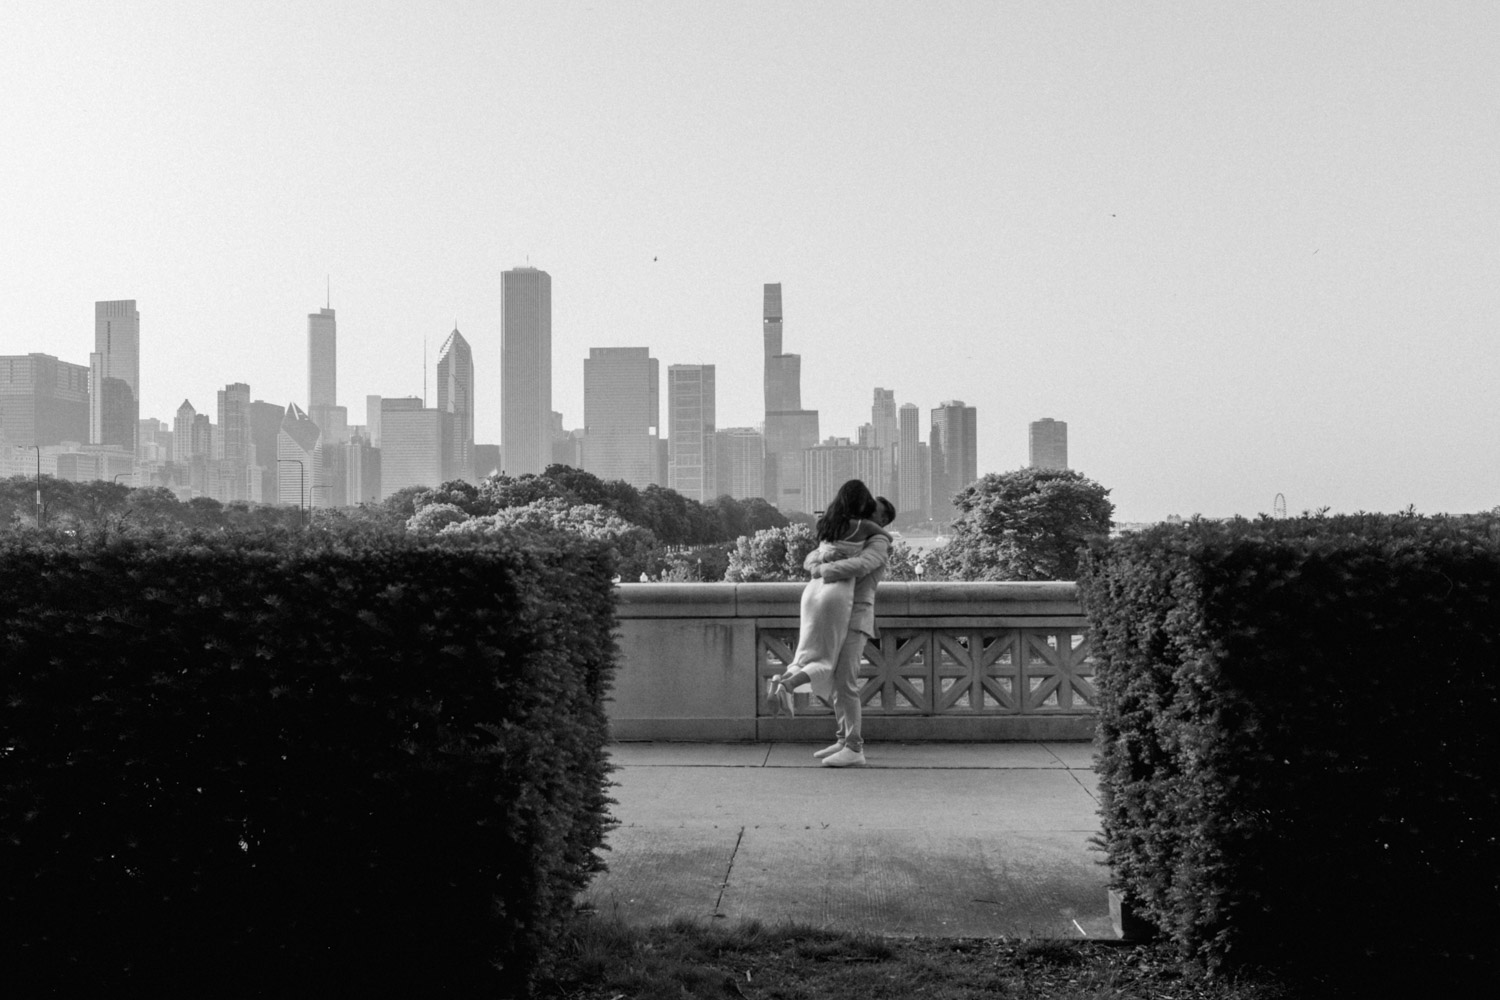 A unique black and white engagement photo featuring the Chicago skyline